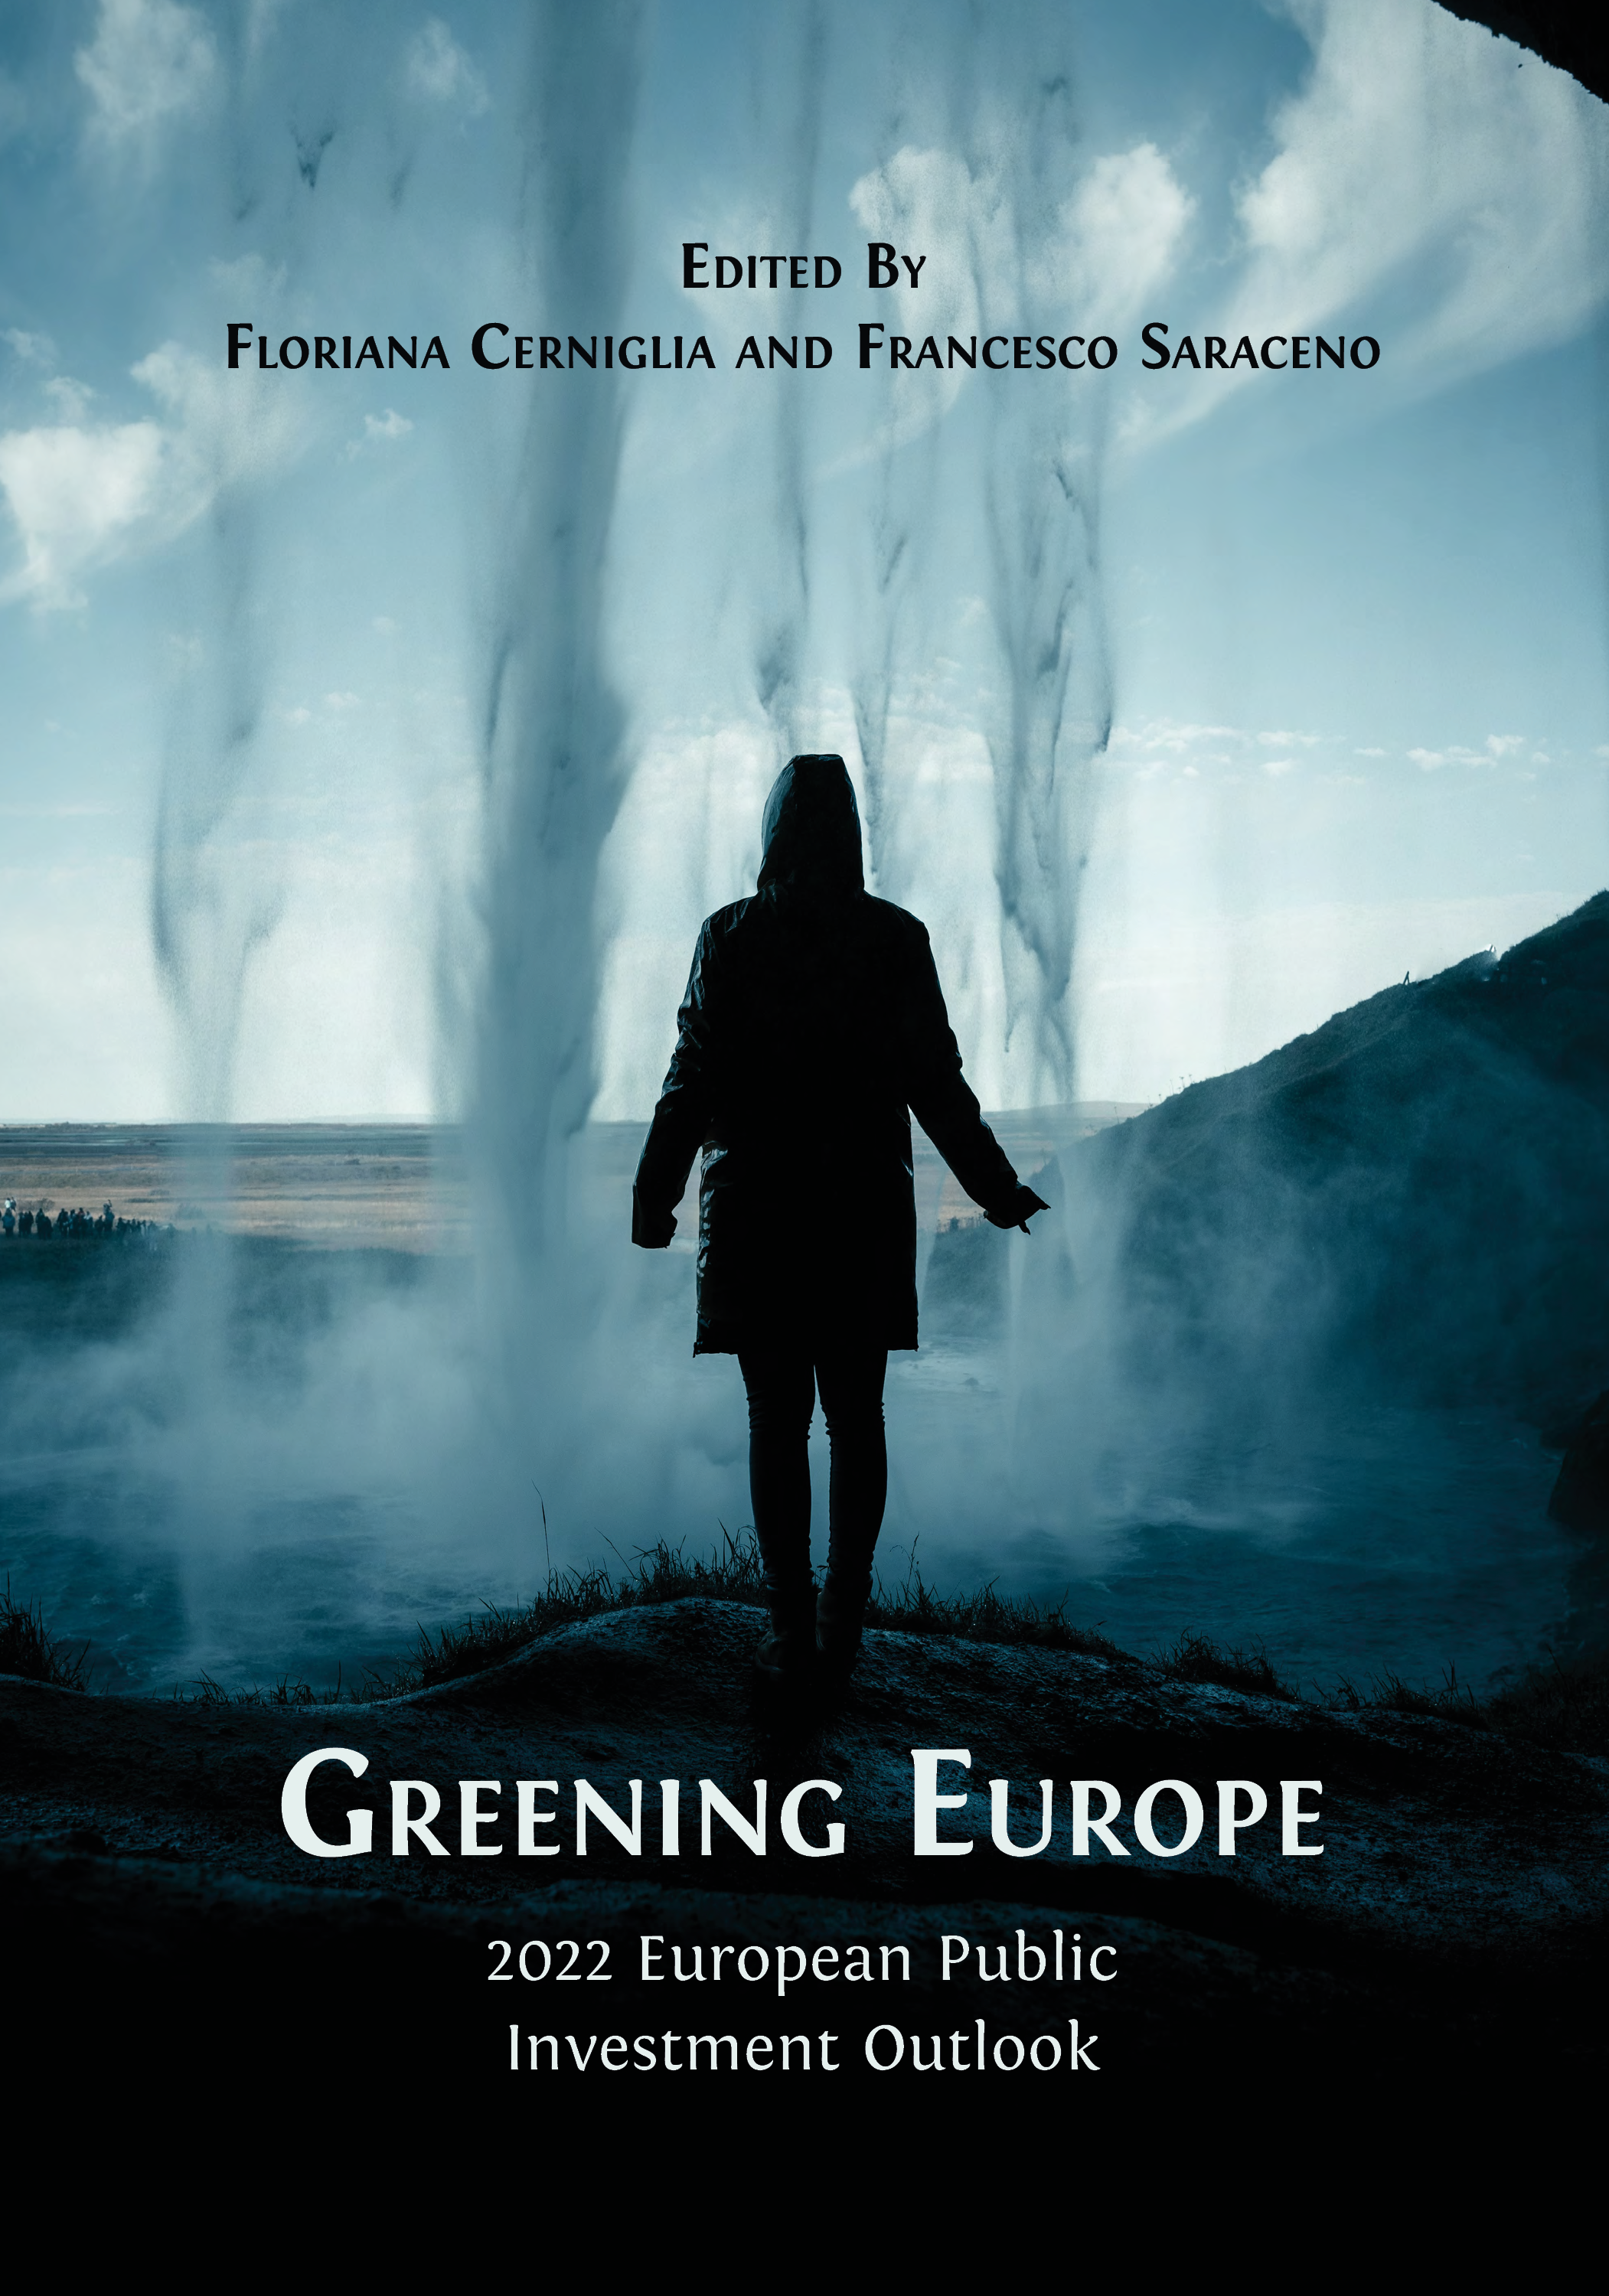 Greening Europe book cover image